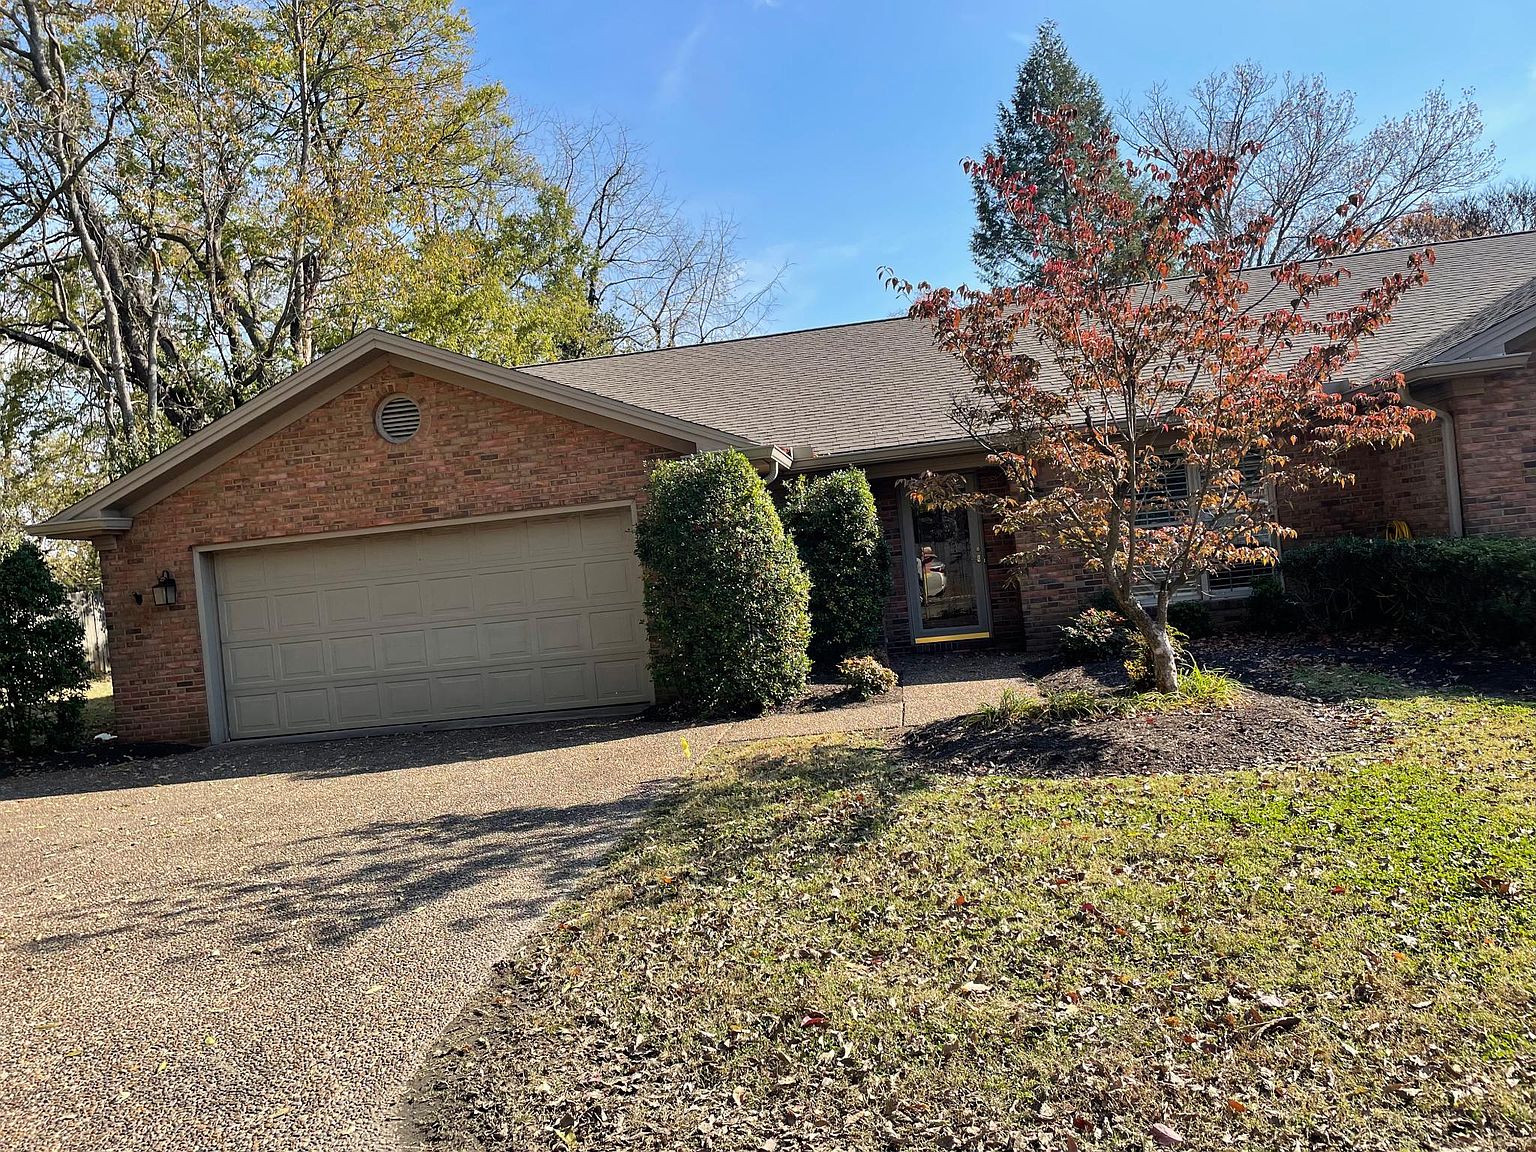 406 Country Club Ln APT 6, Hopkinsville, KY 42240 | Zillow